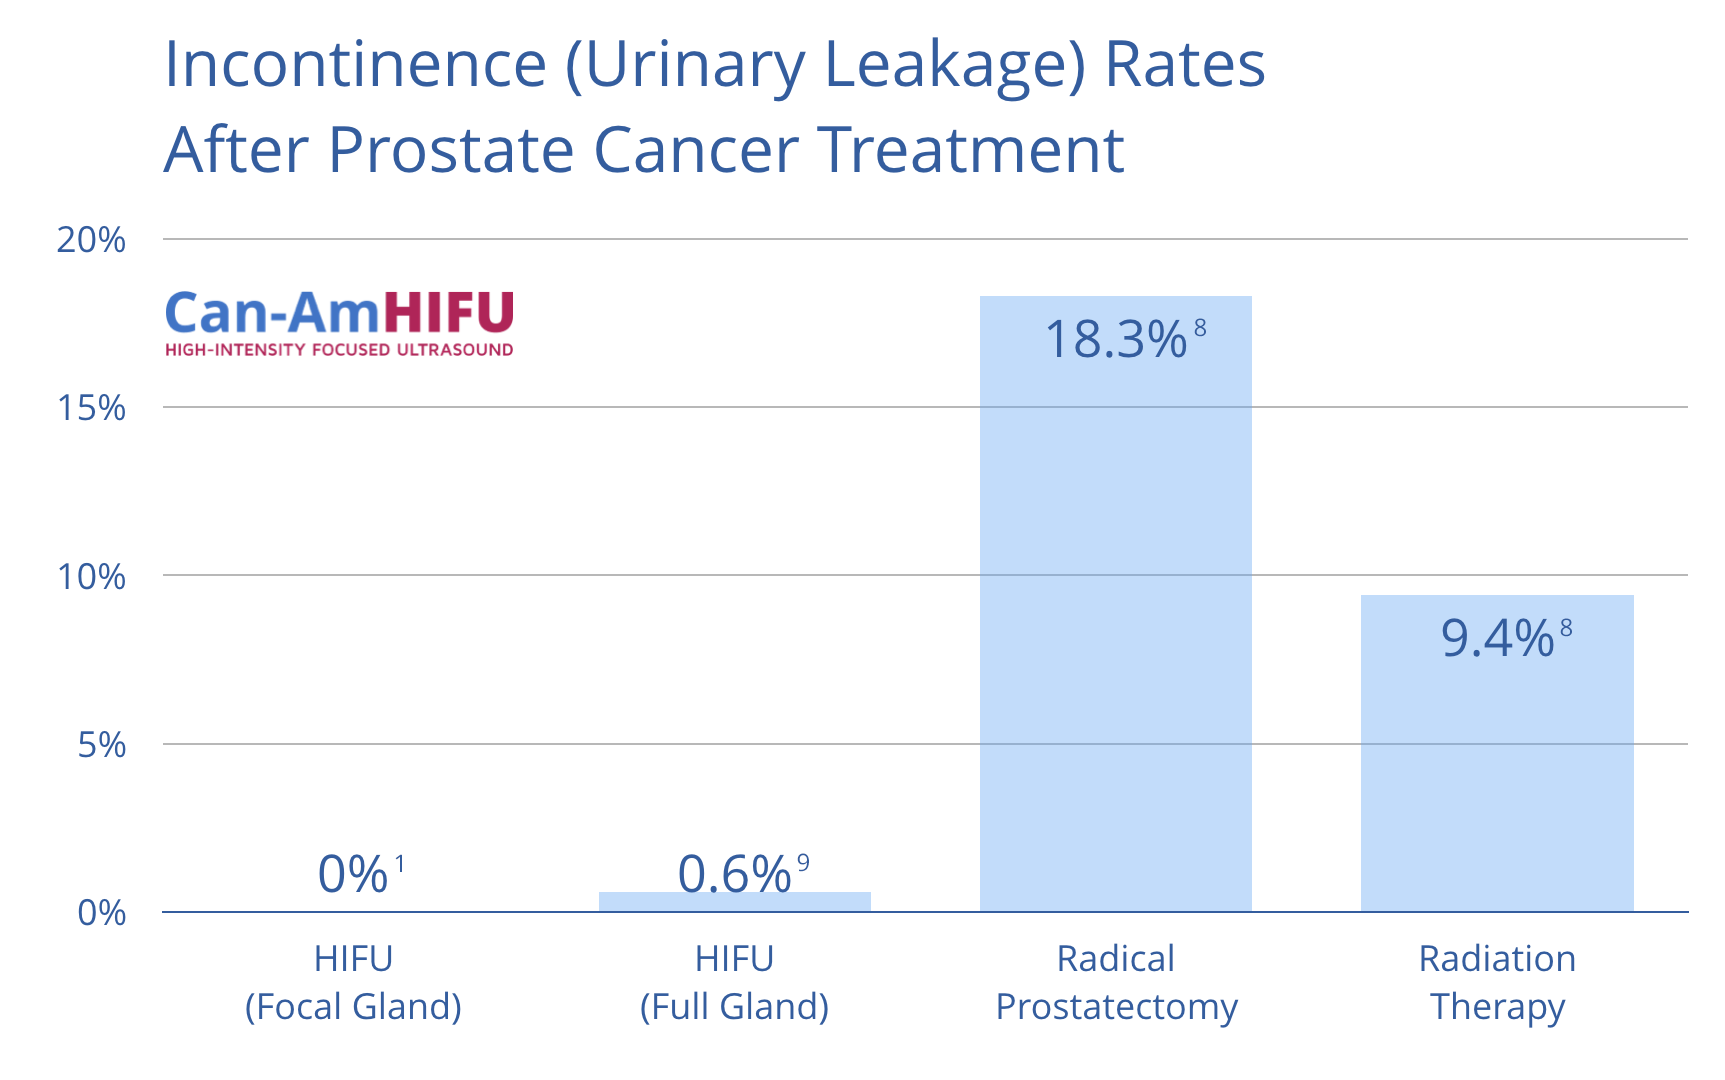 Incontinence (Urinary Leakage) Rates After Prostate Cancer Treatment